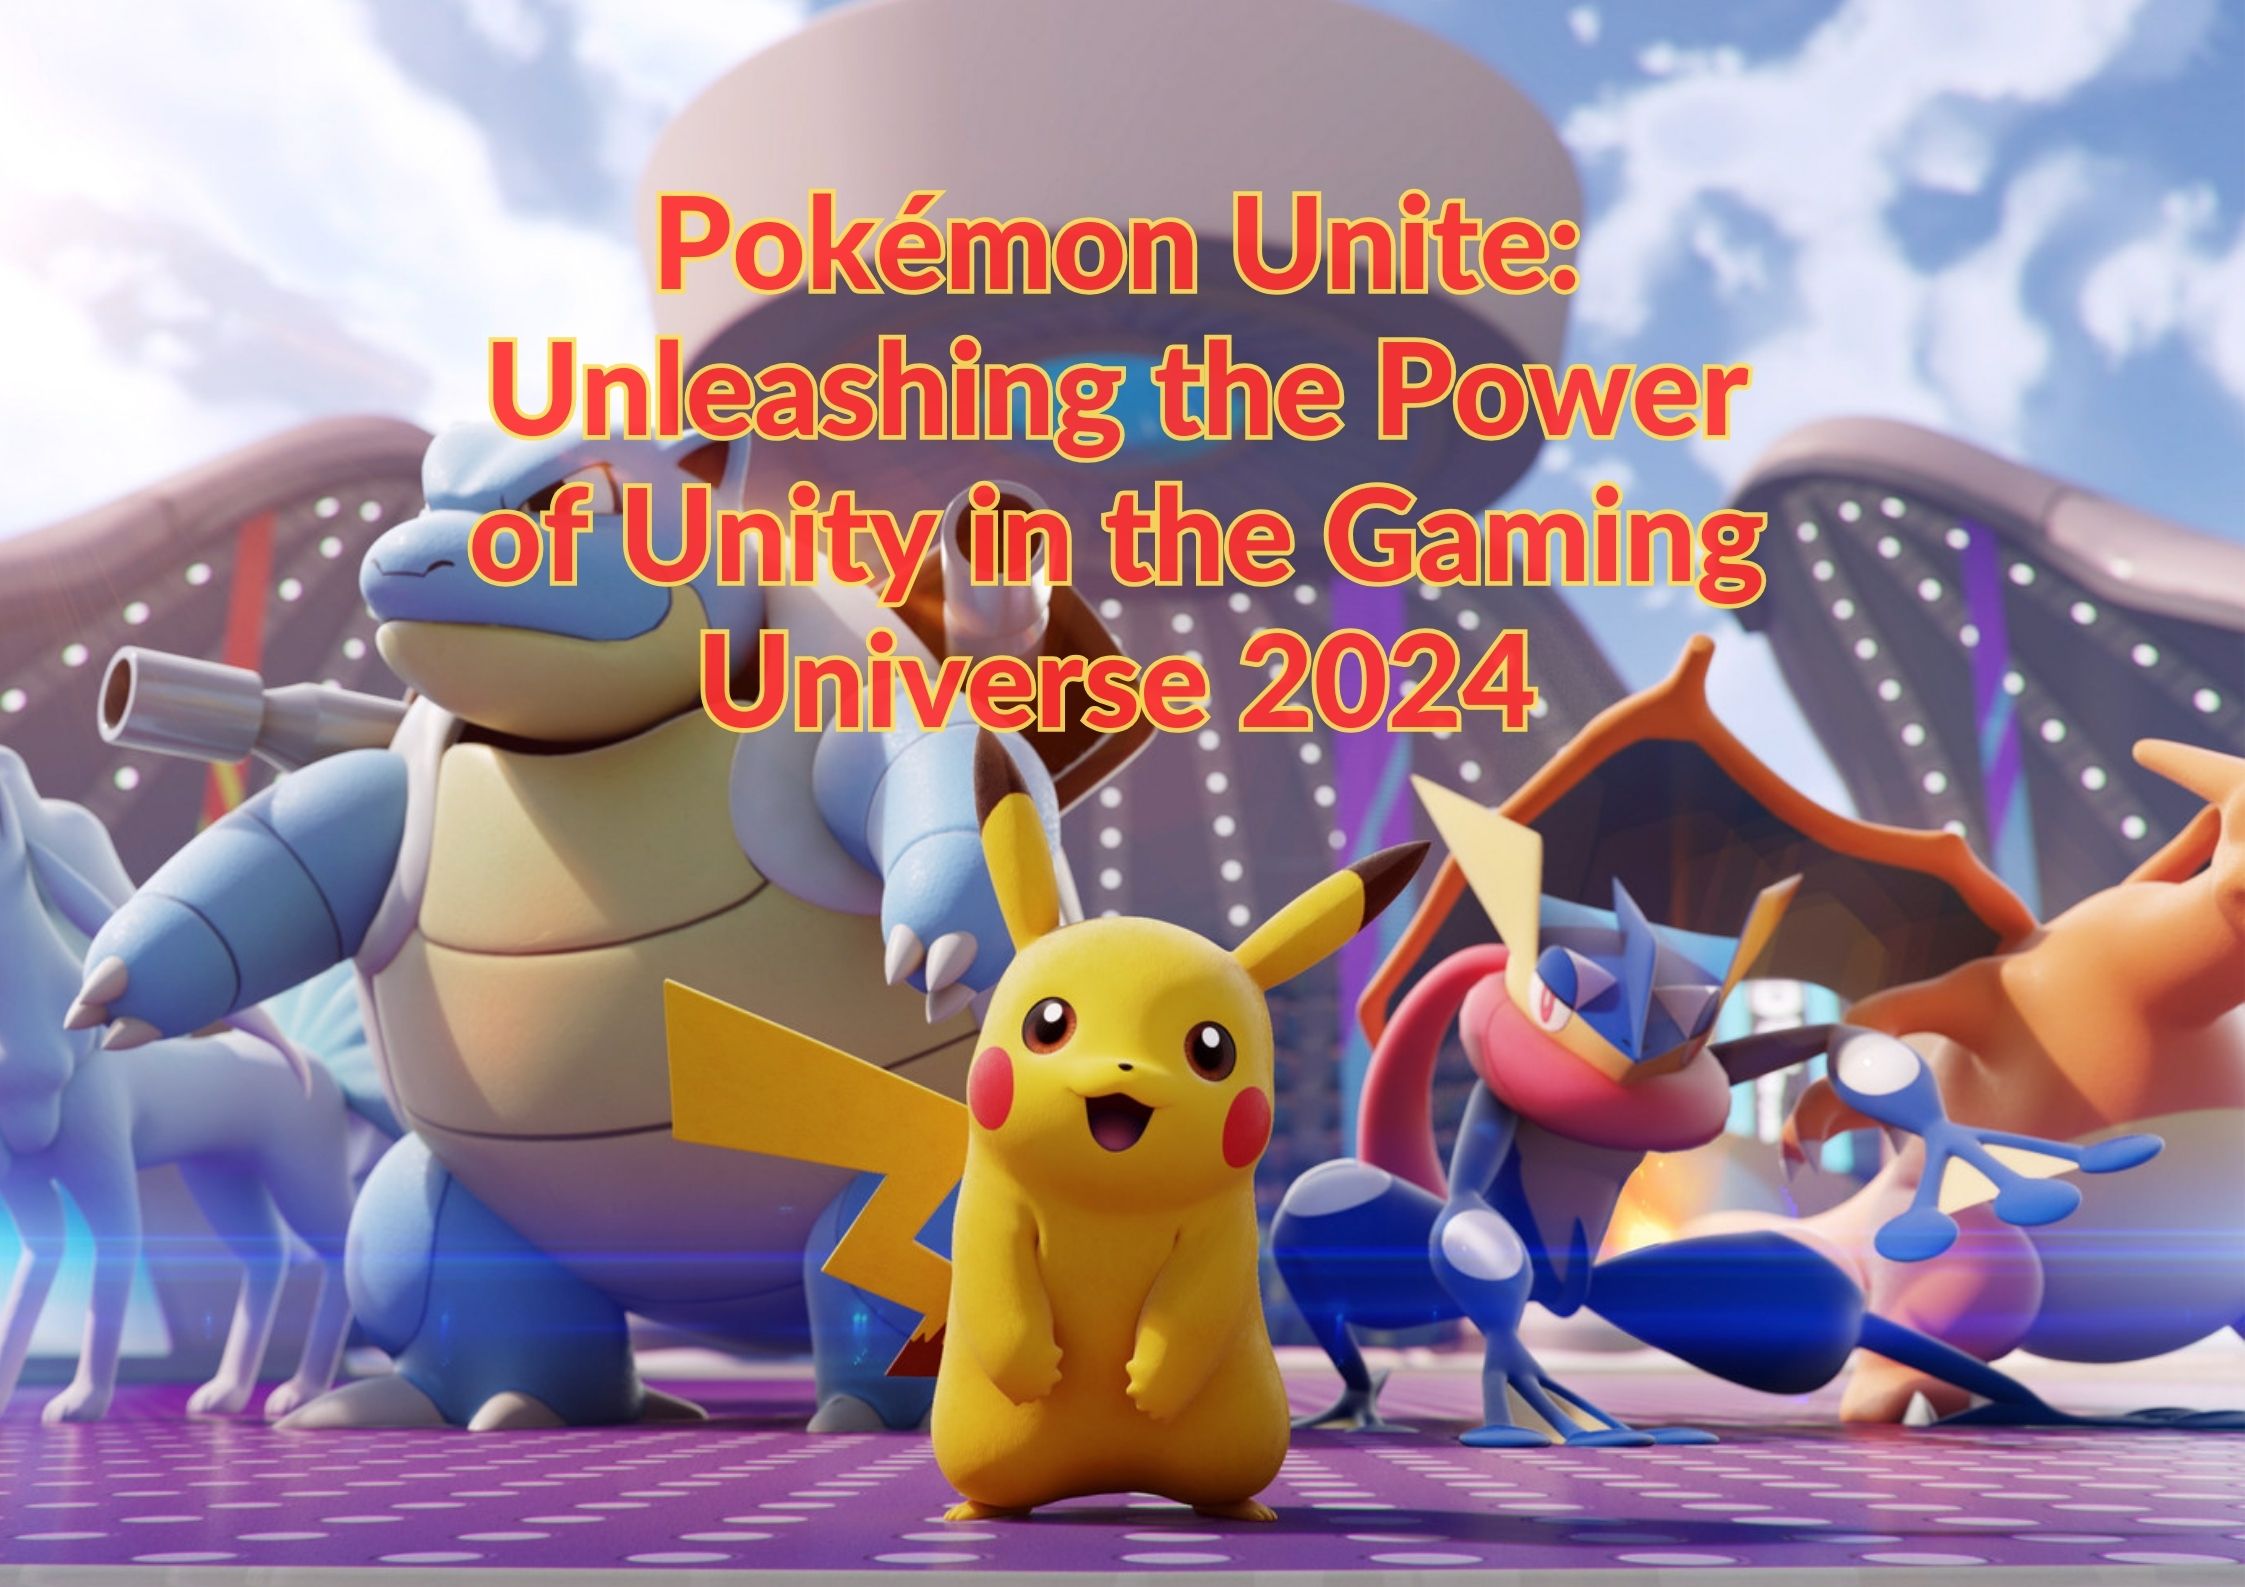 Pokémon Unite: Unleashing the Power of Unity in the Gaming Universe